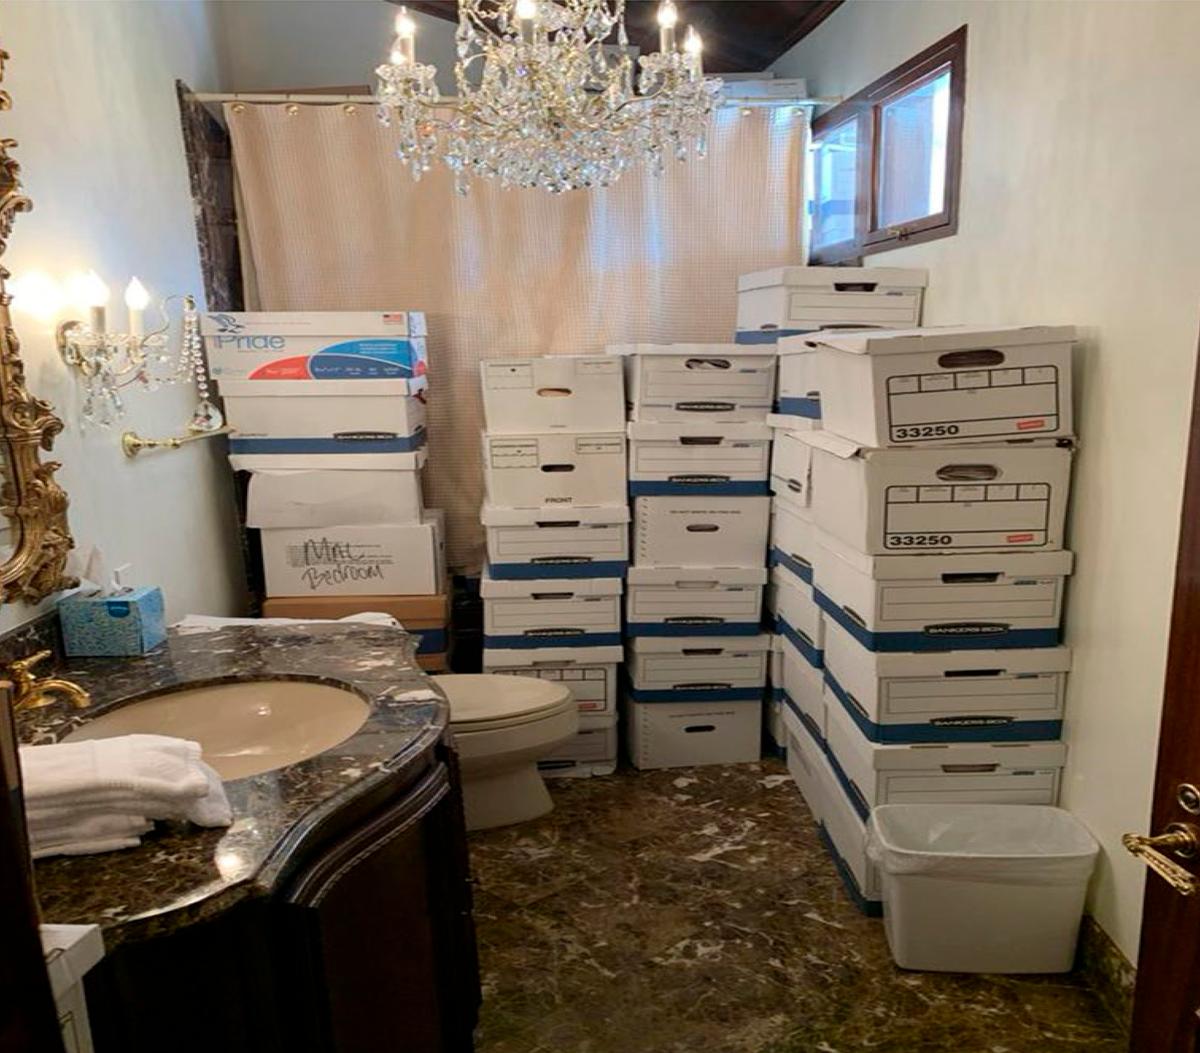 This image, contained in the indictment against former President Donald Trump, shows boxes of records stored in a bathroom at Mr. Trump's Mar-a-Lago estate in Palm Beach, Fla. (Department of Justice via AP)